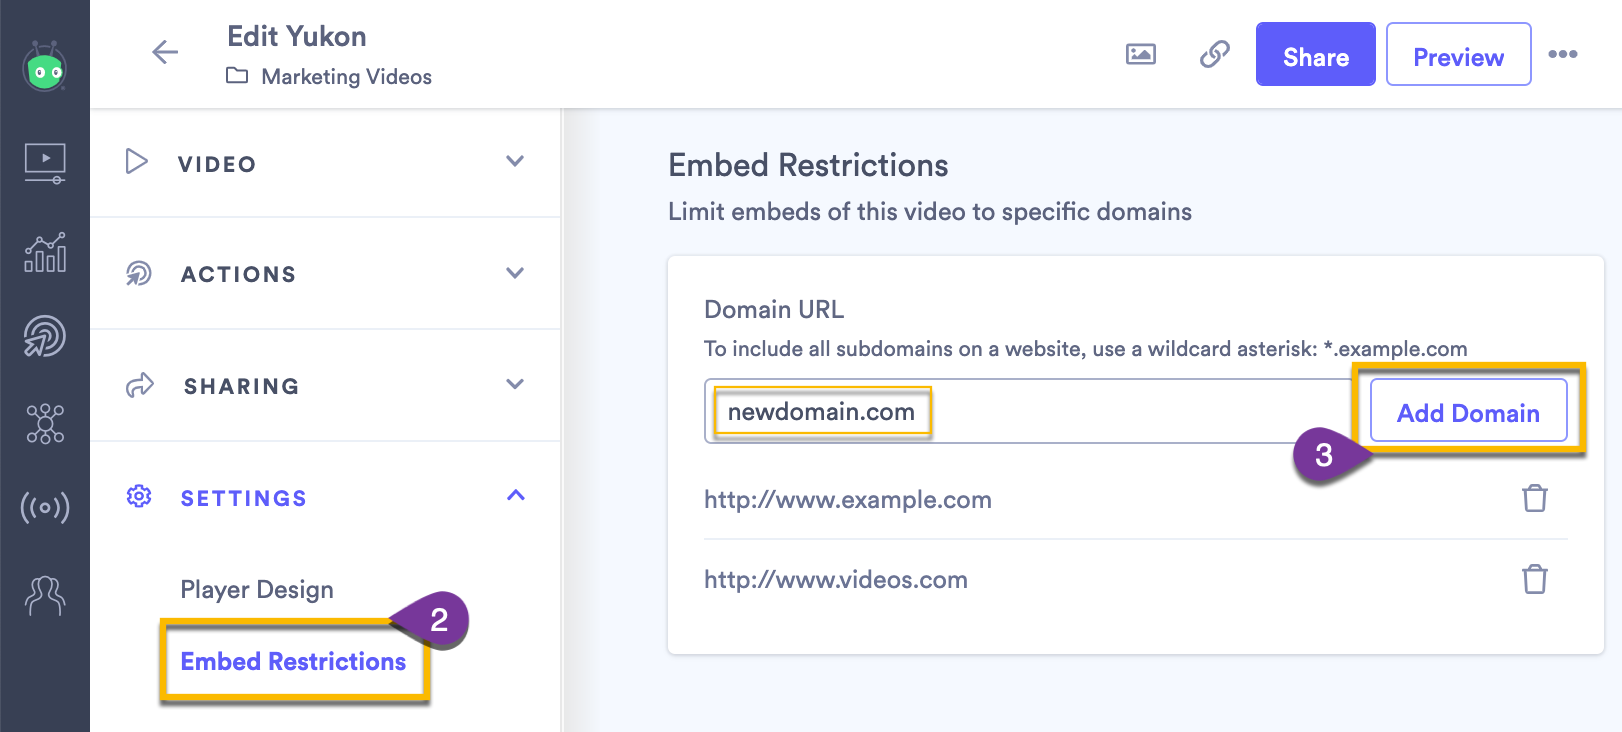 Video settings page showing how to add new allowed domains into list